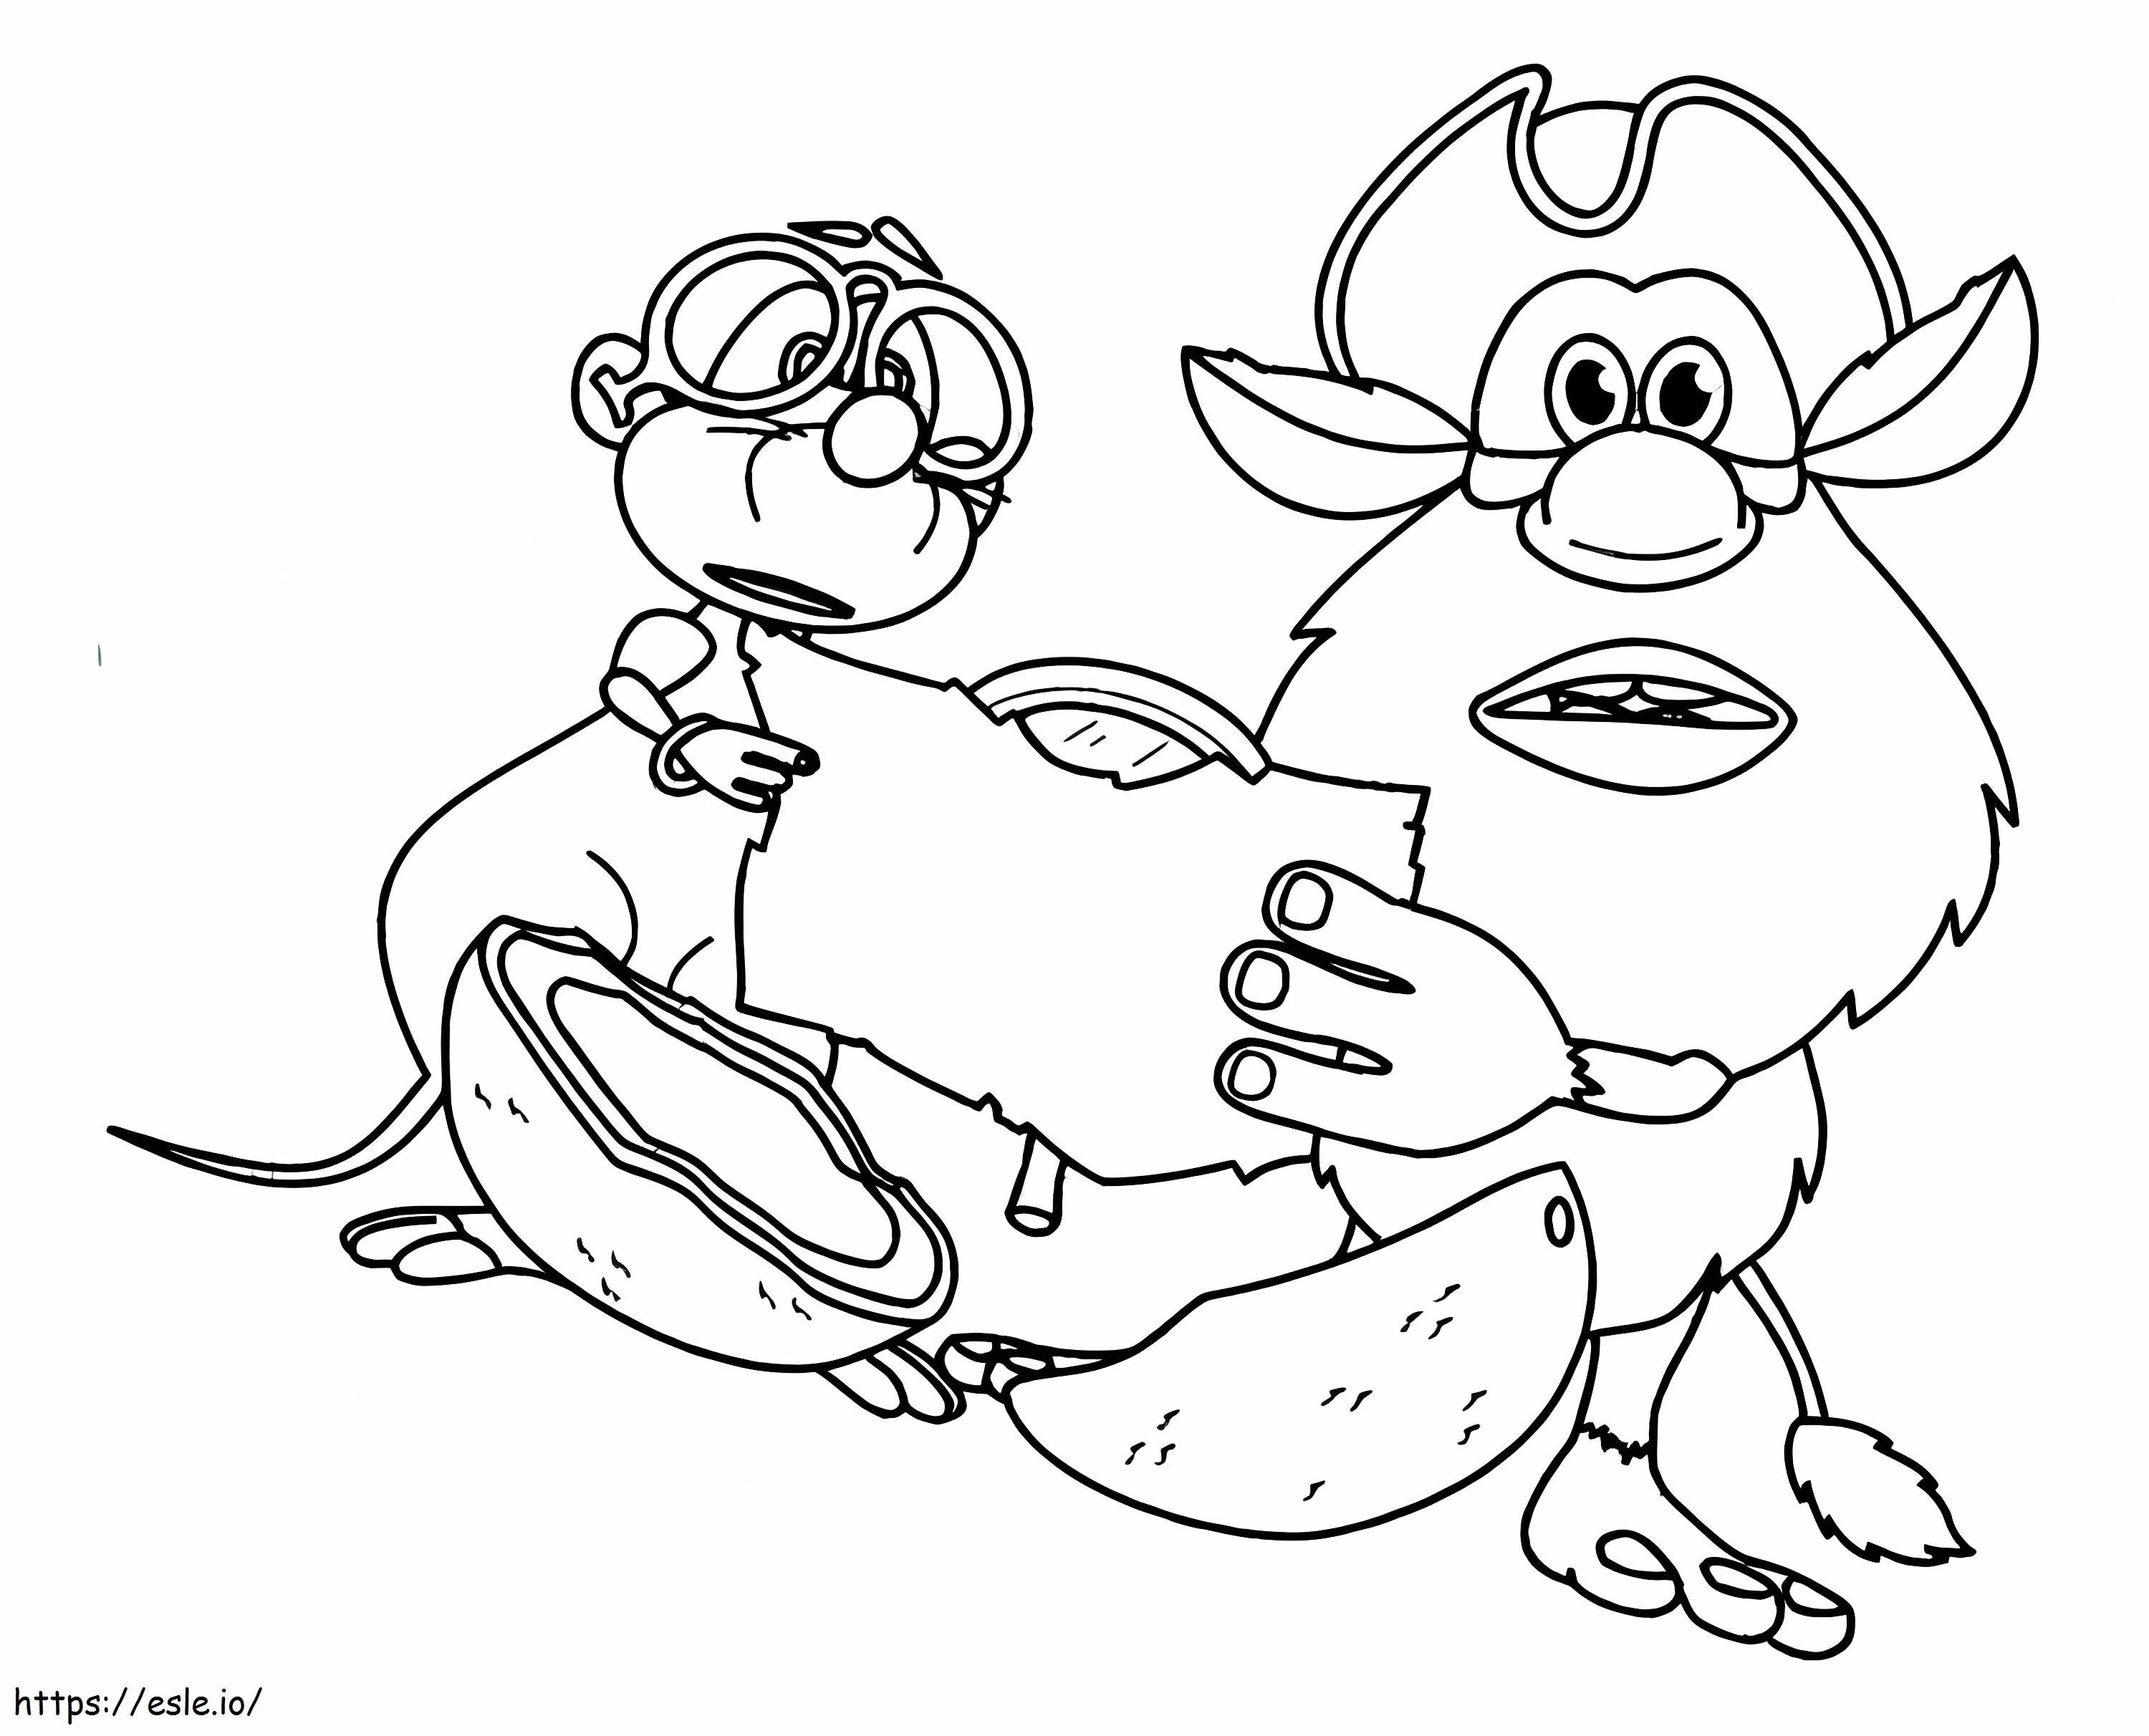 Booba With Best Friend coloring page